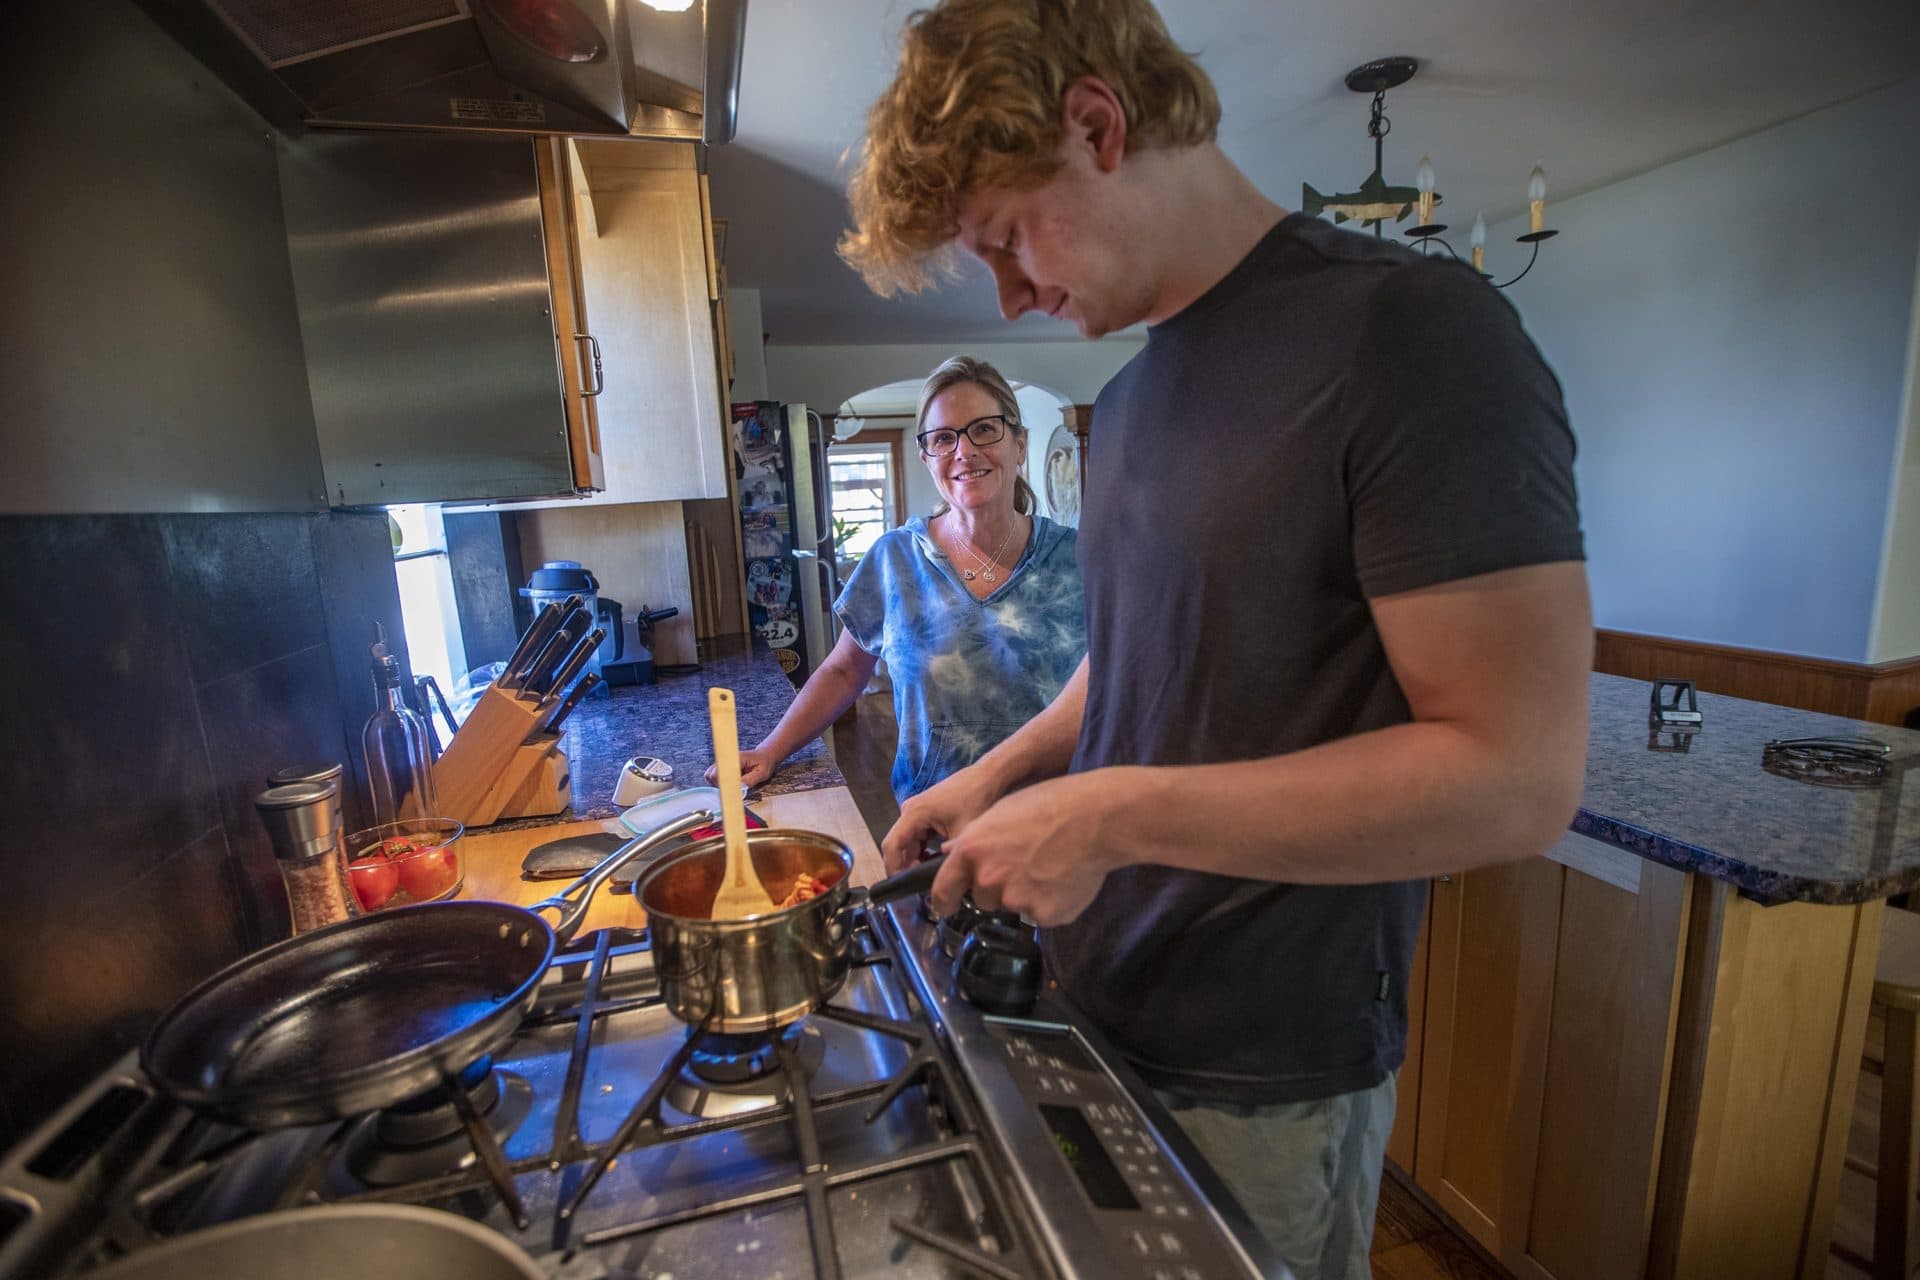 Karen Marmai speaks with her son Jackson as he prepares lunch on the stove top. (Jesse Costa/WBUR)